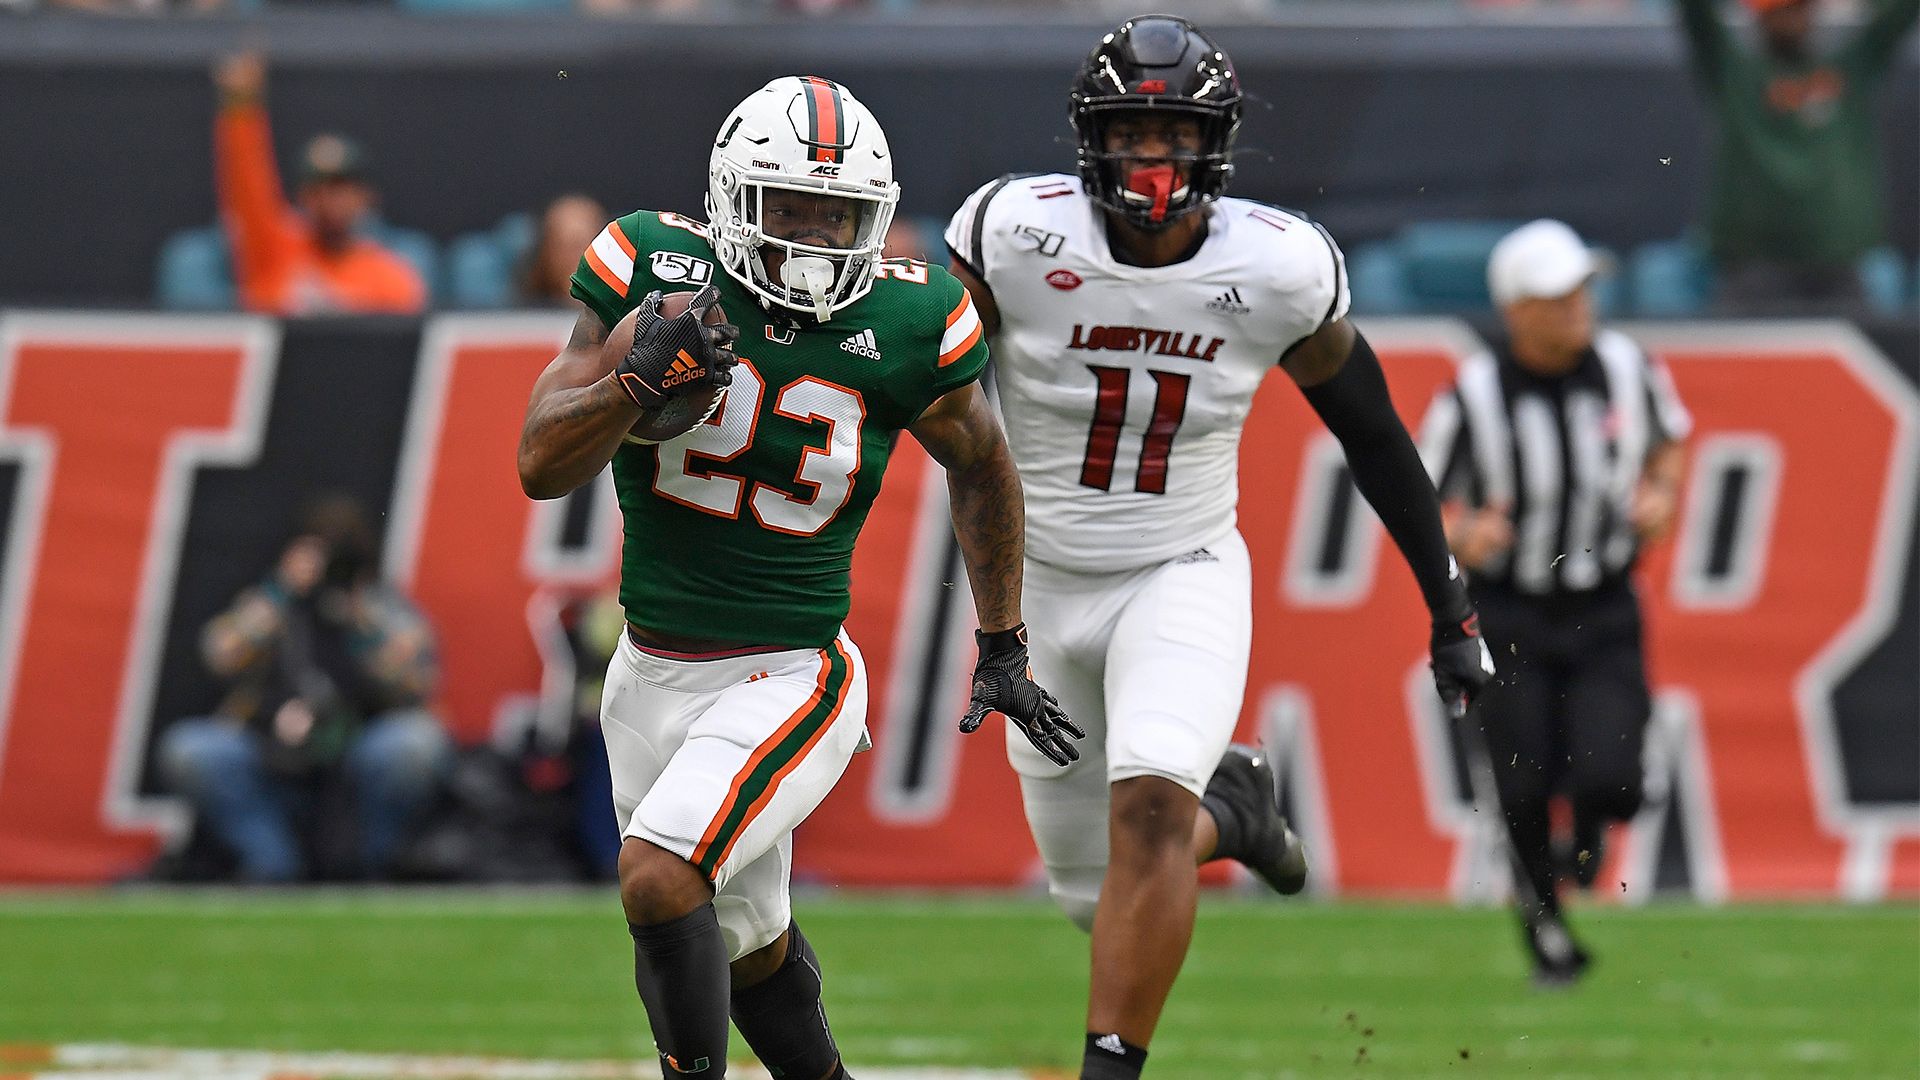 No. 17 Canes Ready for Primetime Matchup at No. 18 Louisville